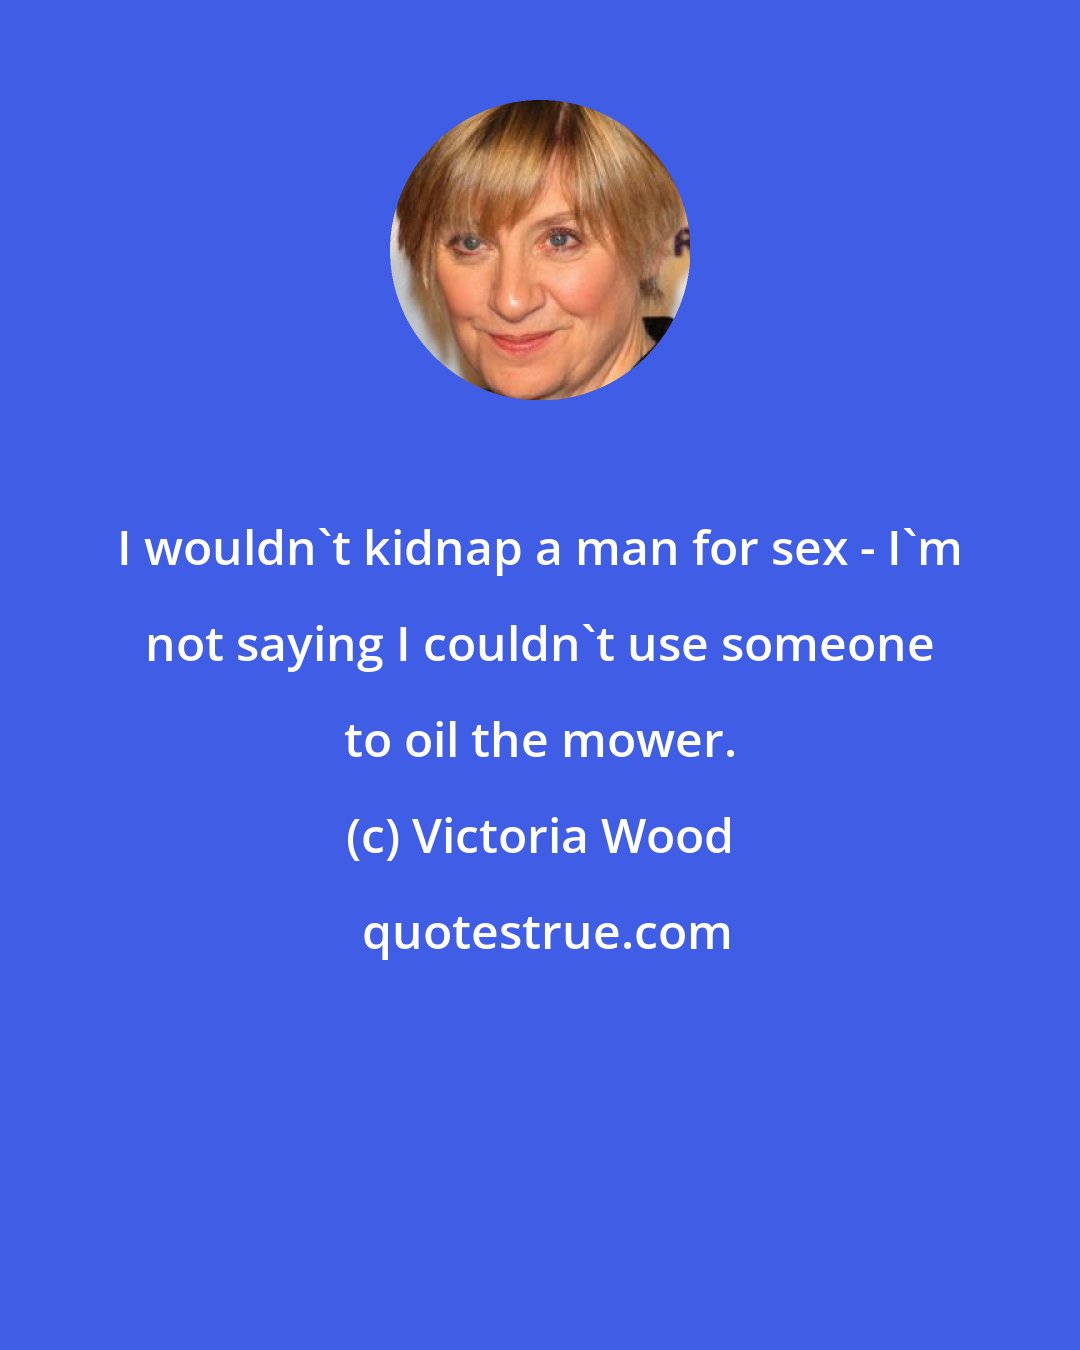 Victoria Wood: I wouldn't kidnap a man for sex - I'm not saying I couldn't use someone to oil the mower.